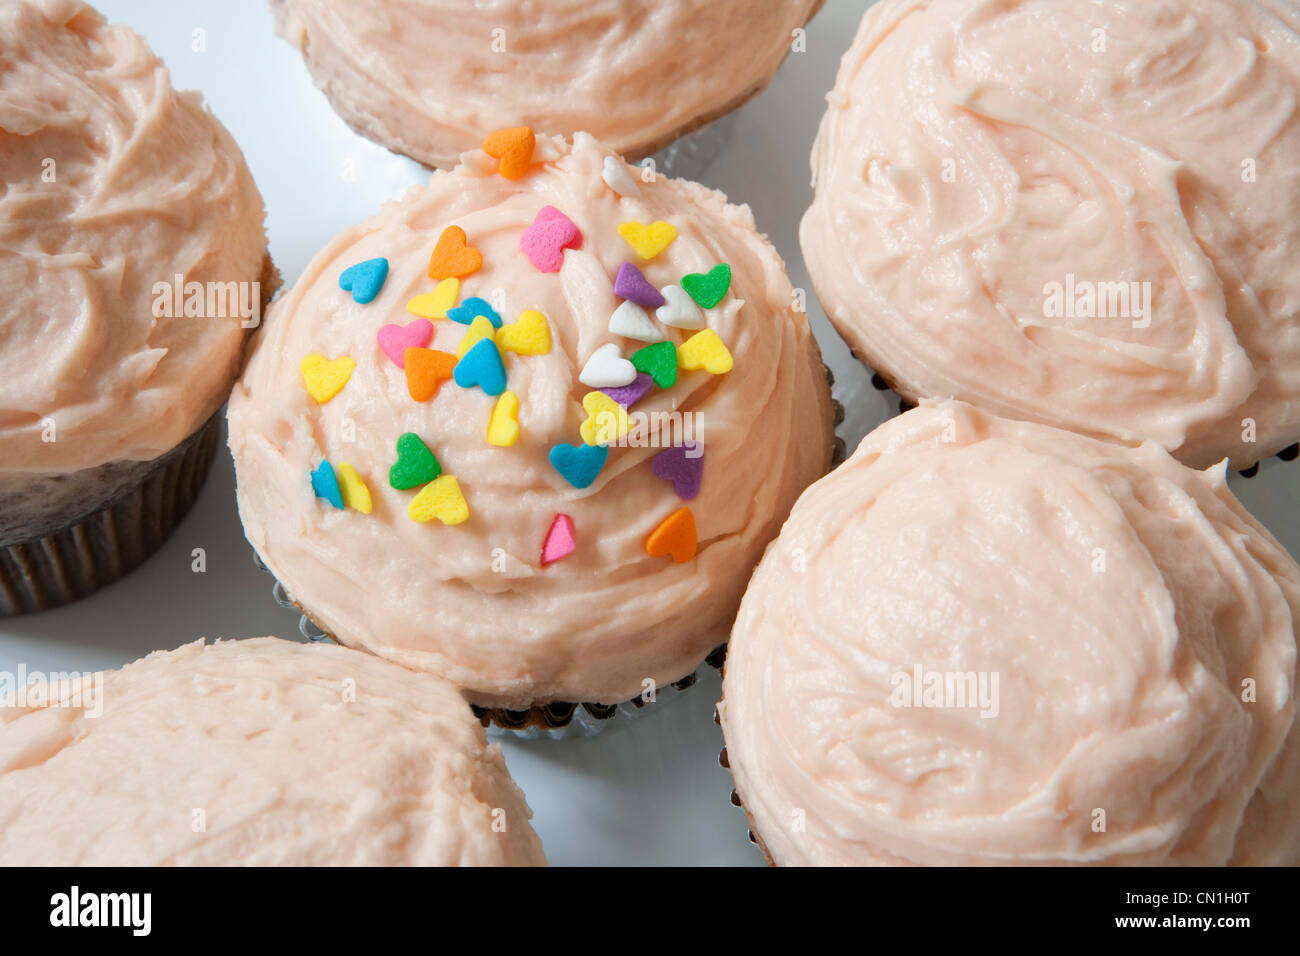 Cupcakes With Frosting and Sprinkles Stock Photo